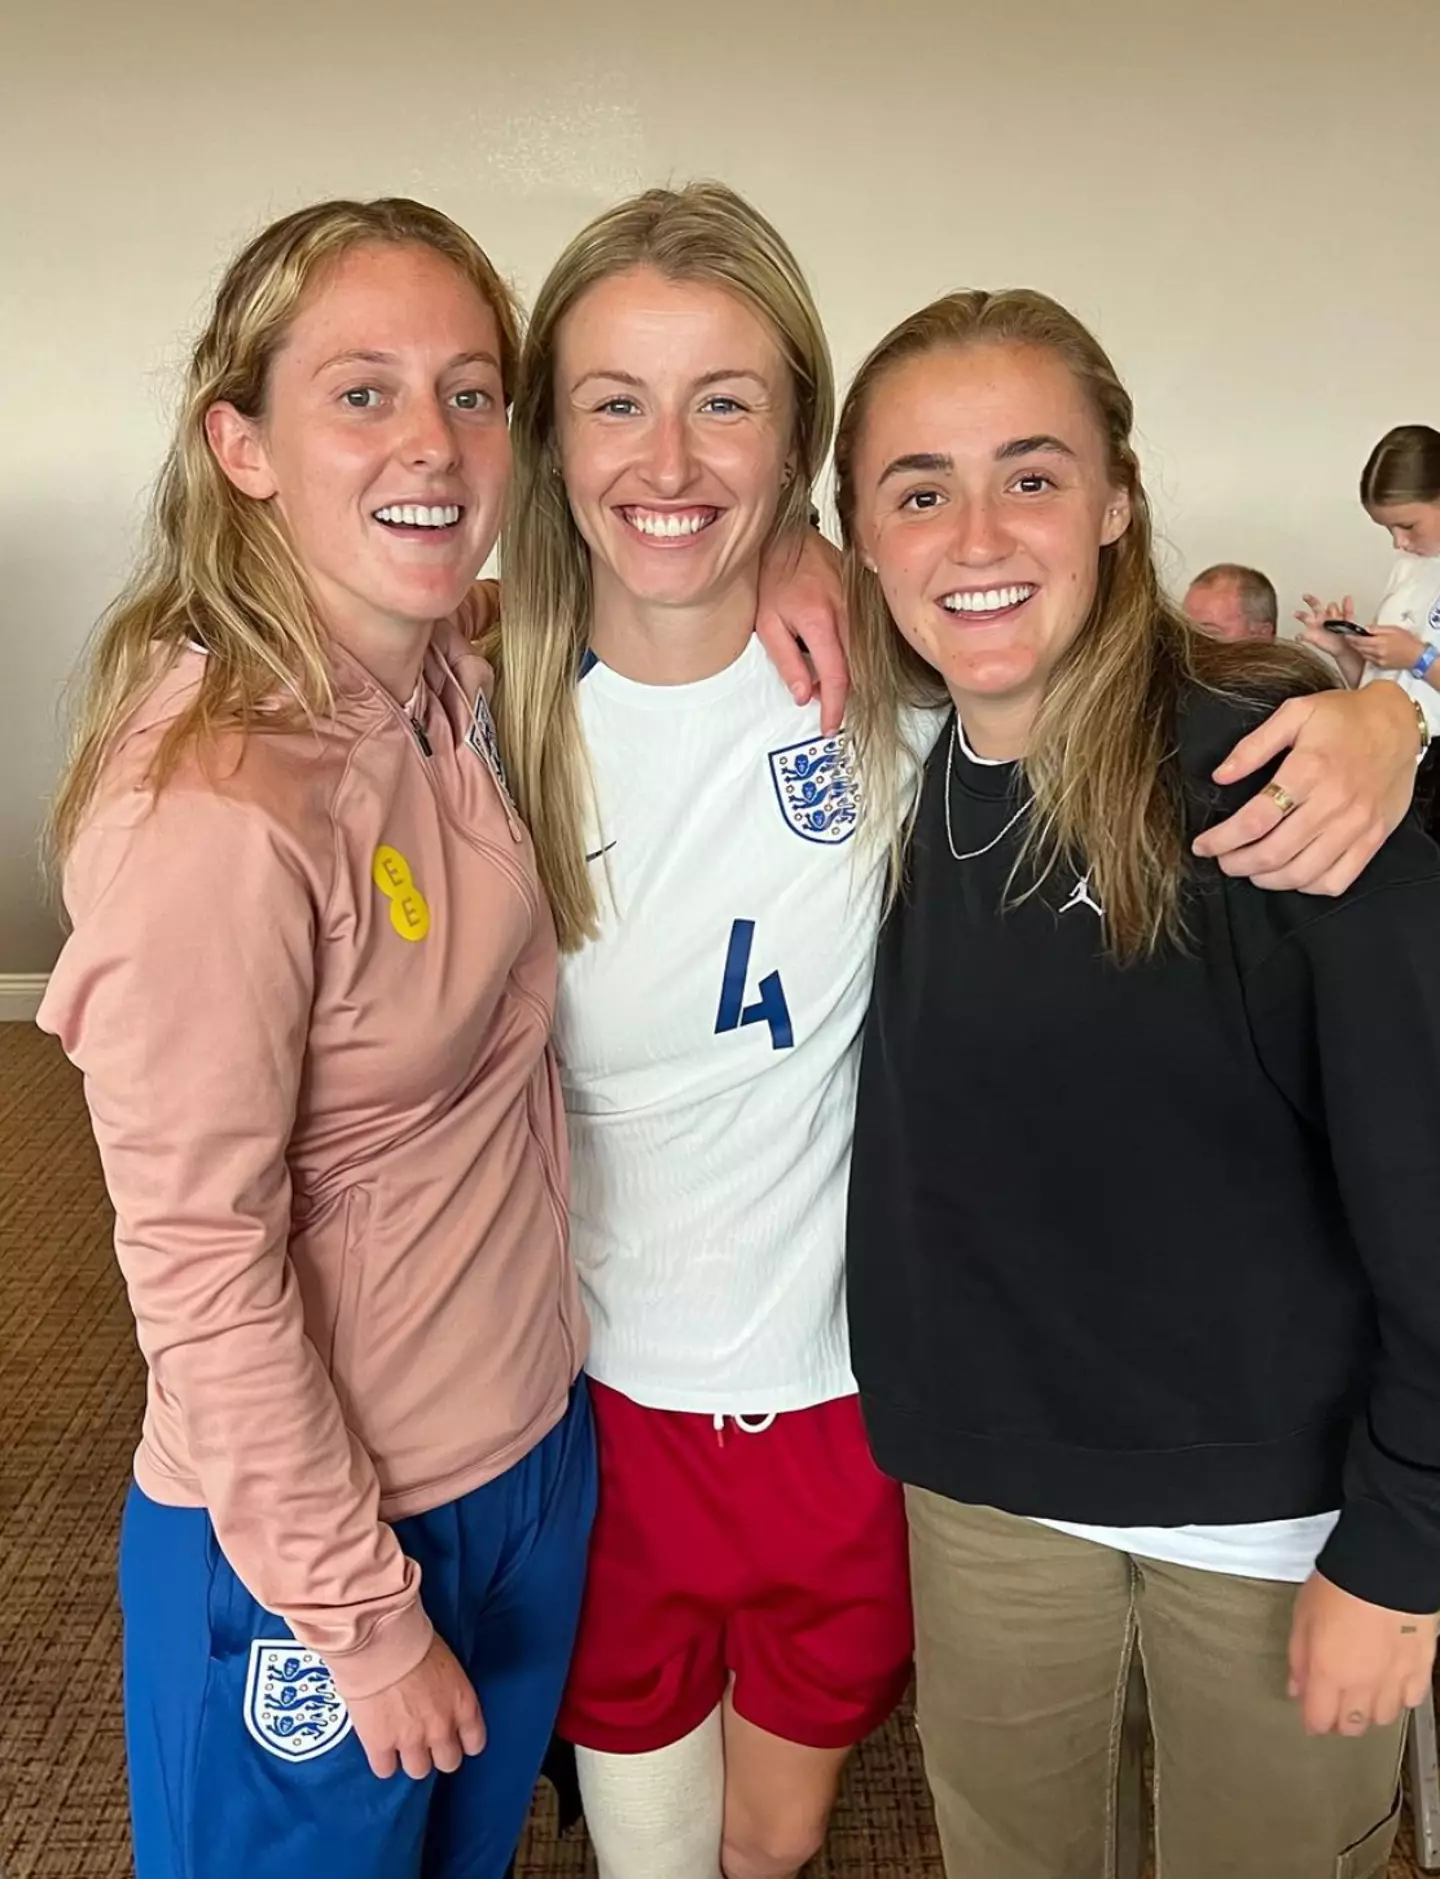 The Lionesses will face Spain in the Women's World Cup without captain Leah Williamson (centre).